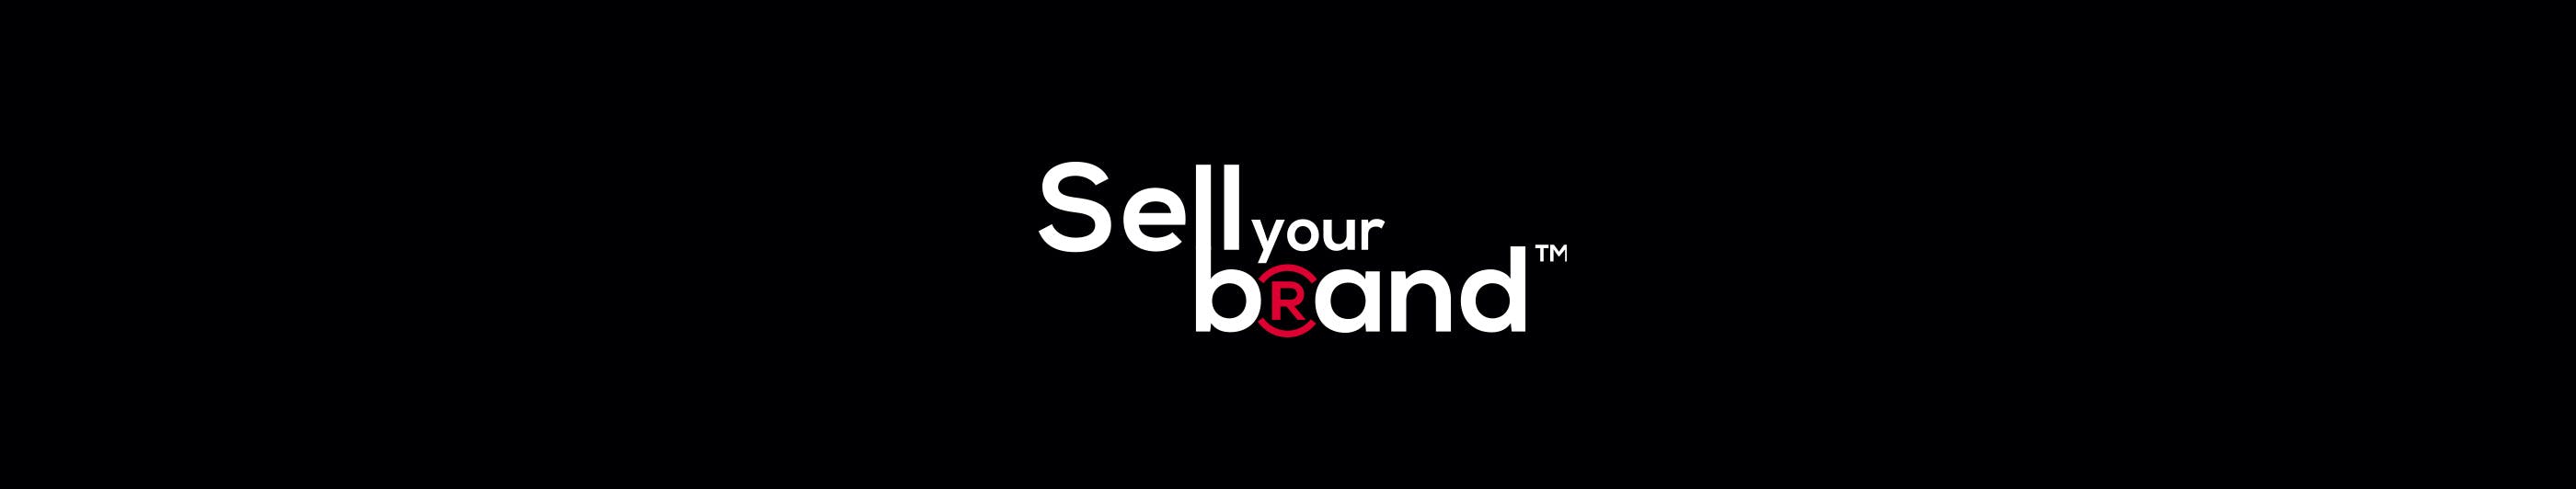 Sell Your Brand Footer